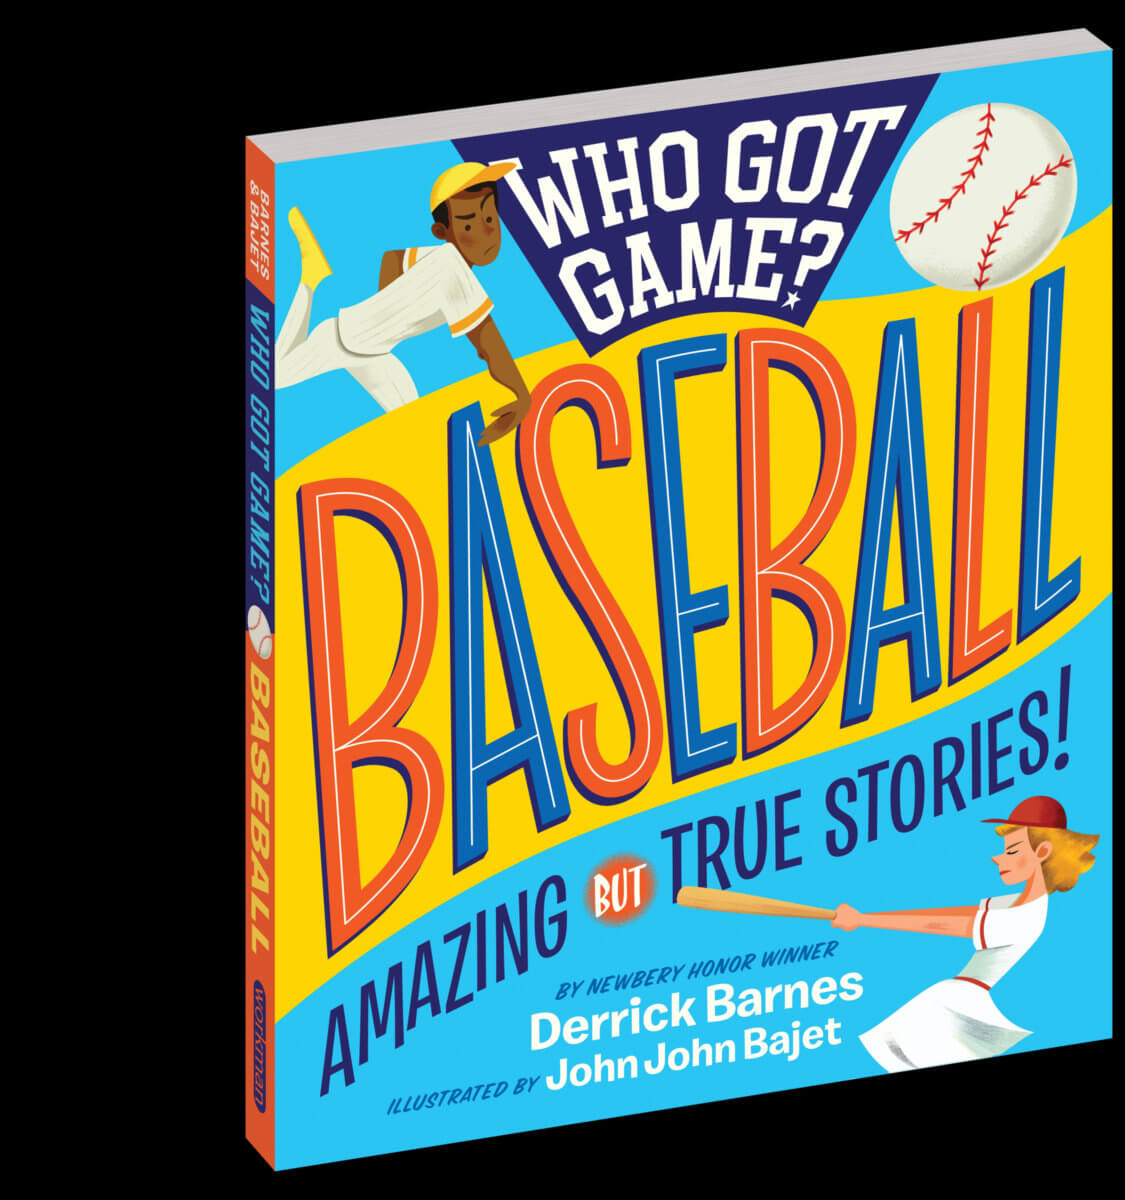 Book cover of “Who Got Game? Baseball” by Derrick Barnes.